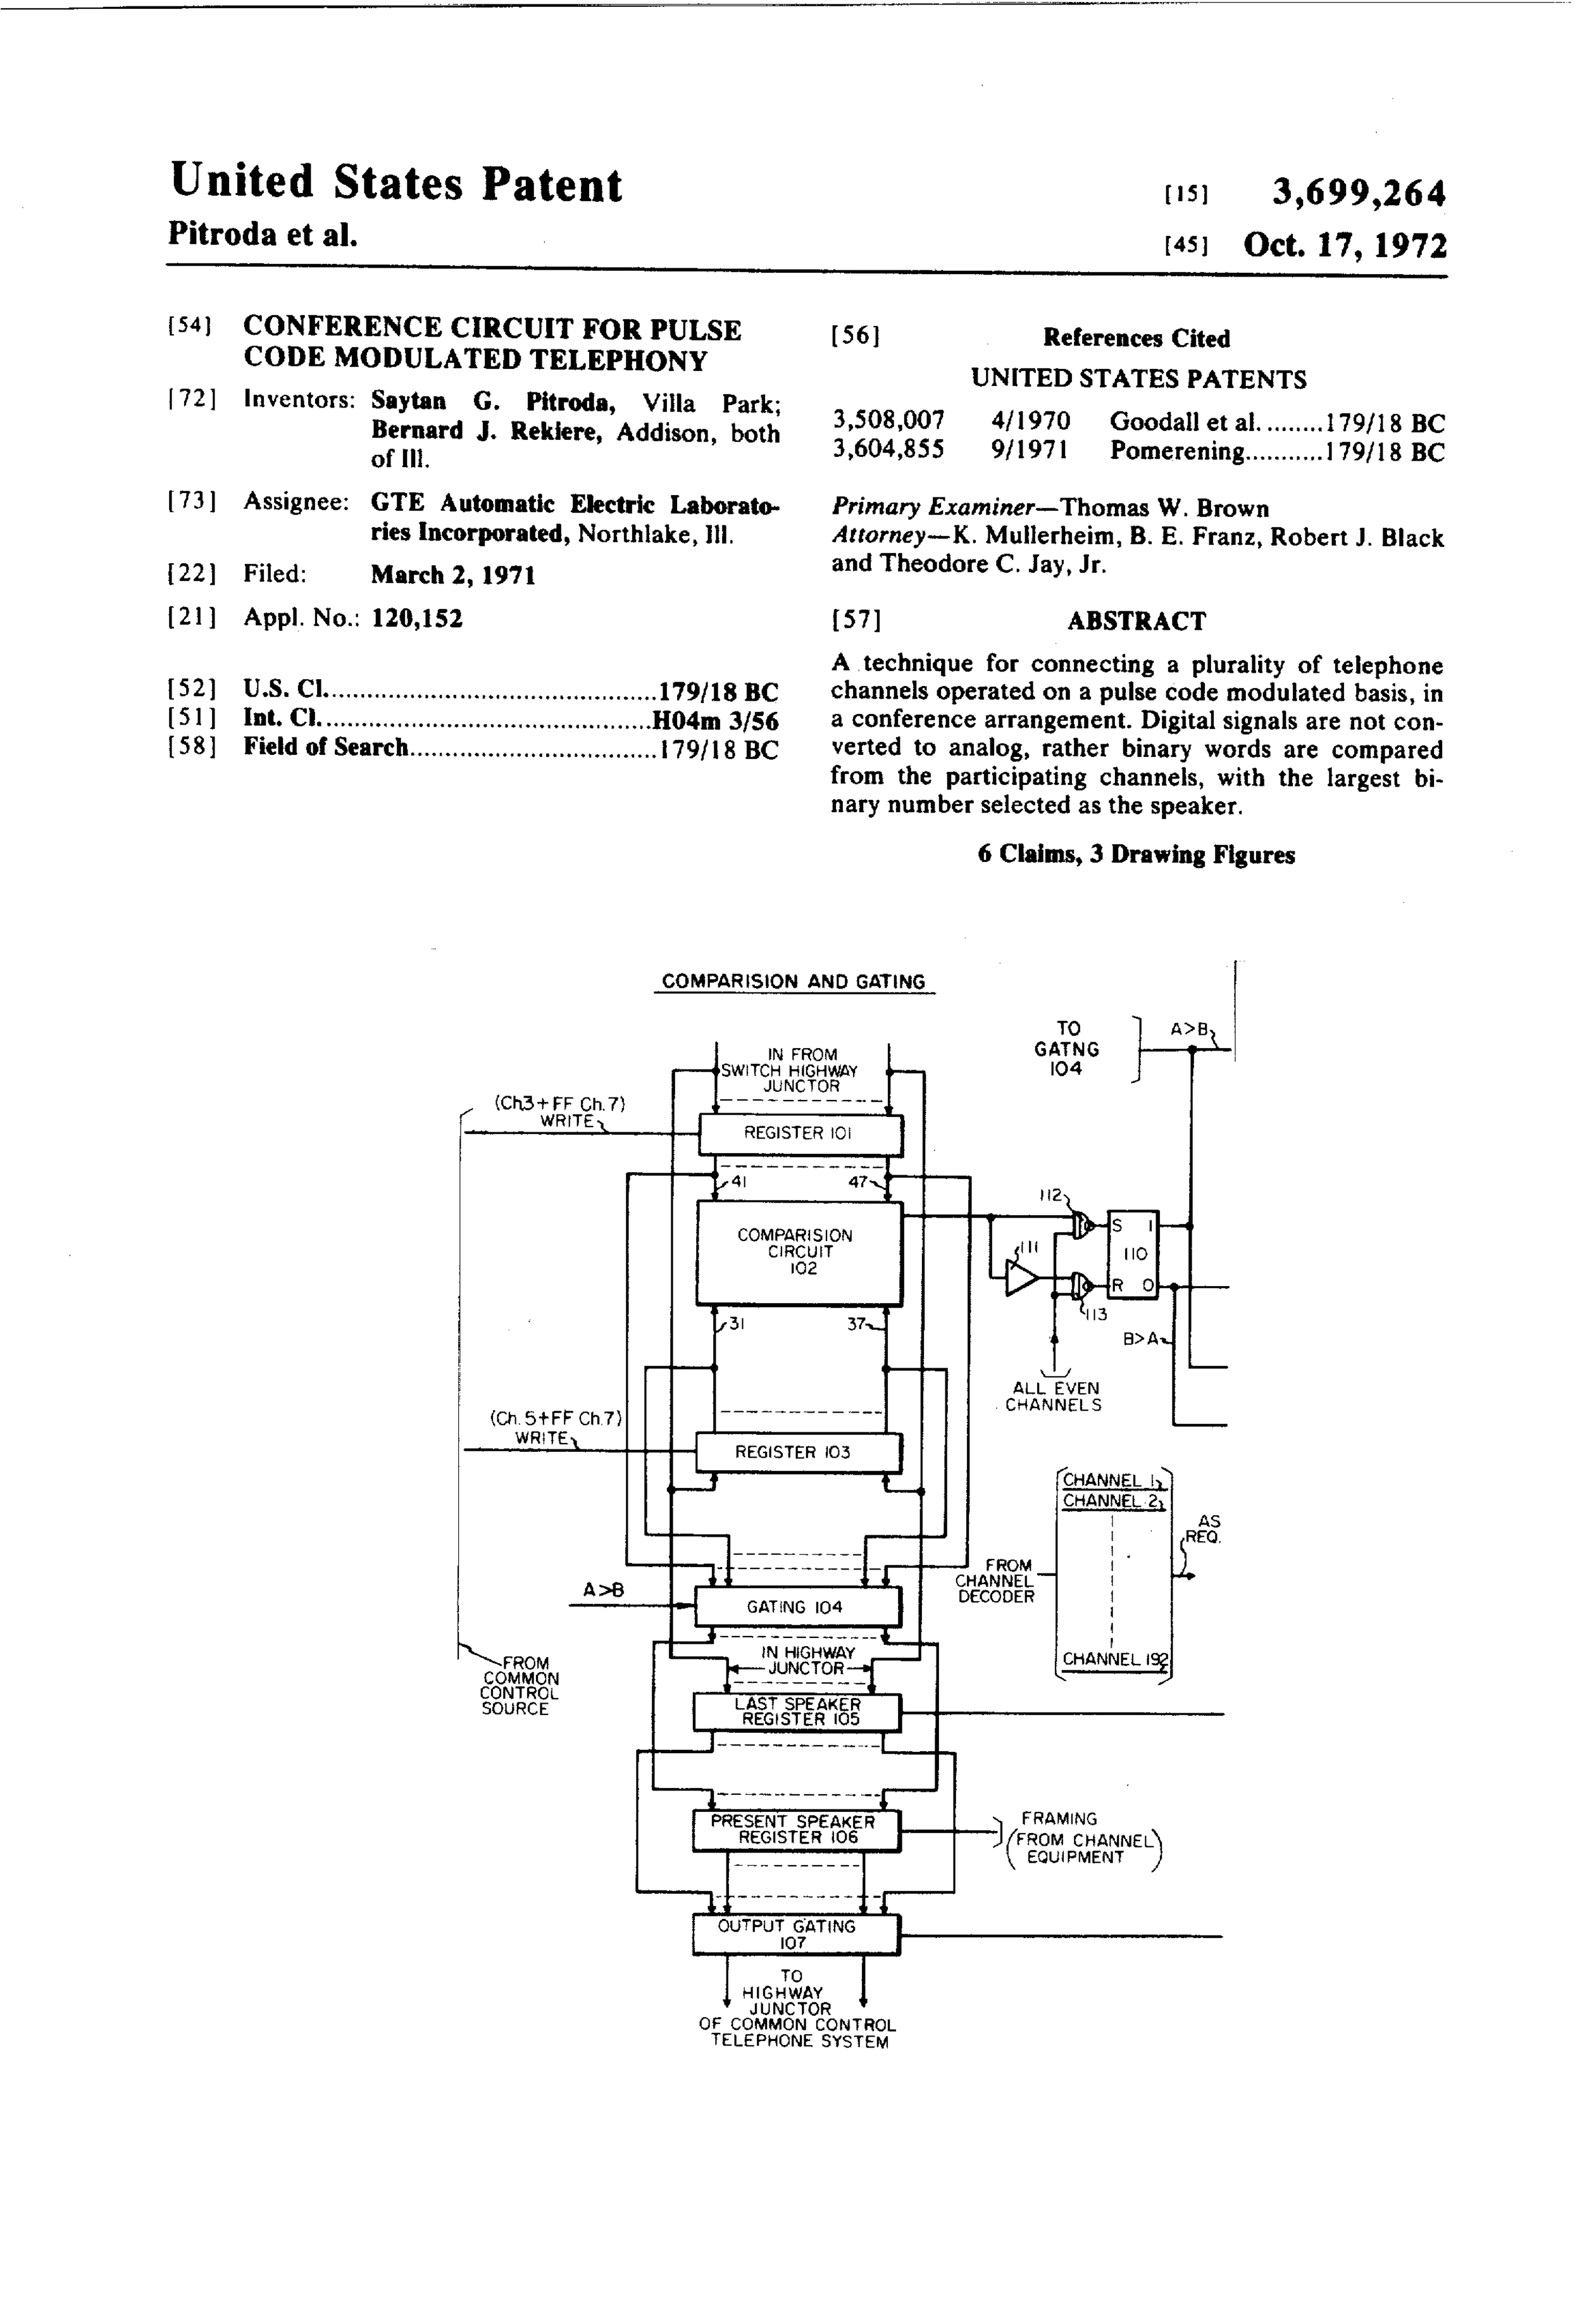 US3699264 Conference Circuit For Pulse Code Modulated Telephony.jpg